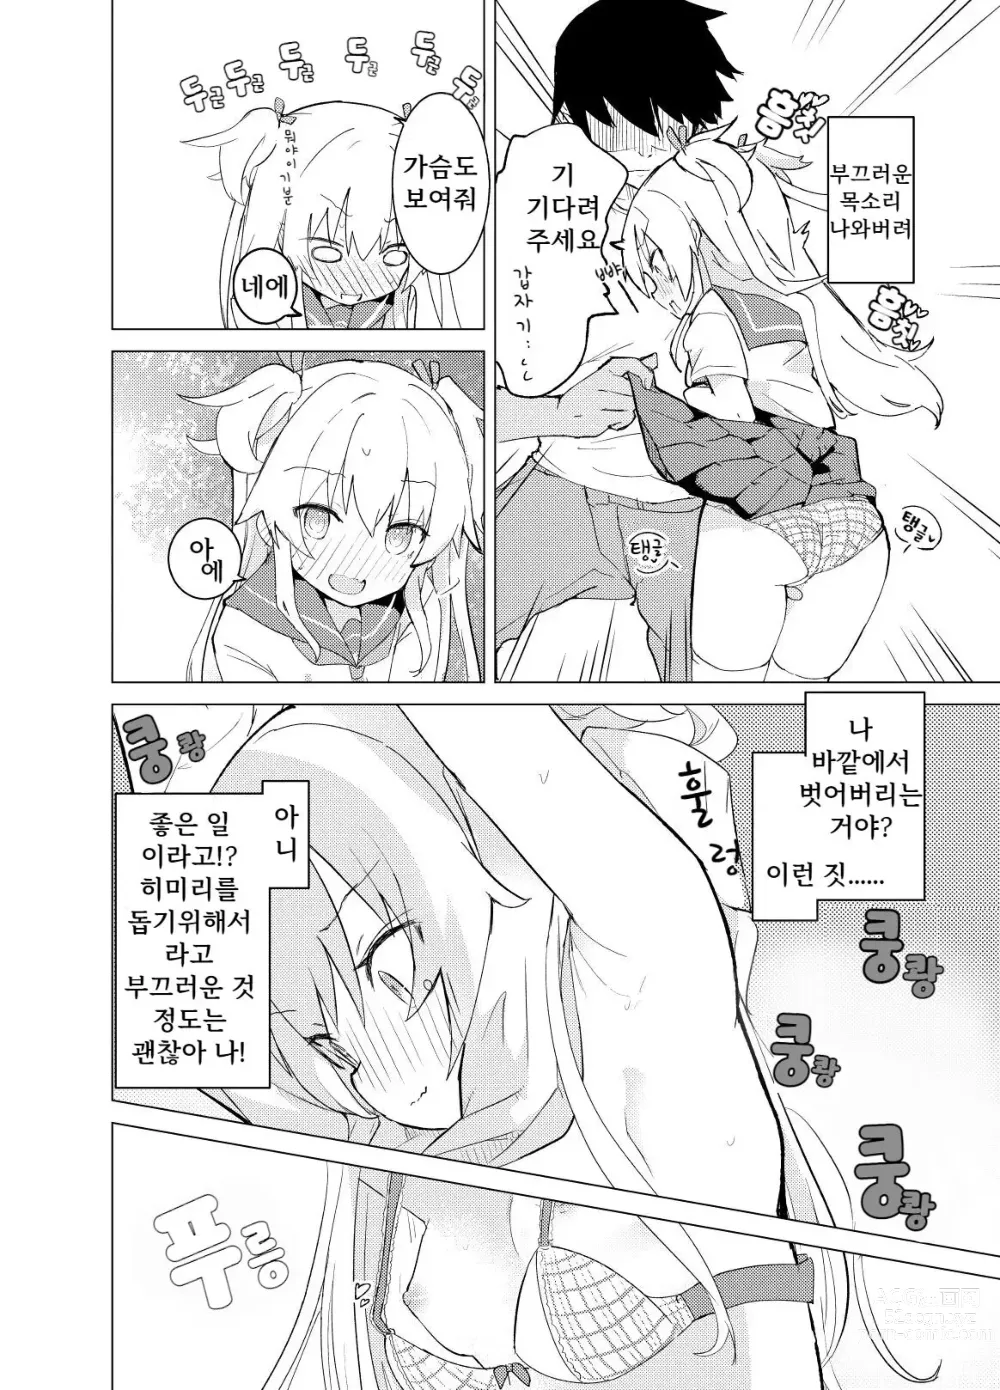 Page 17 of doujinshi S.S.S.Di part 1